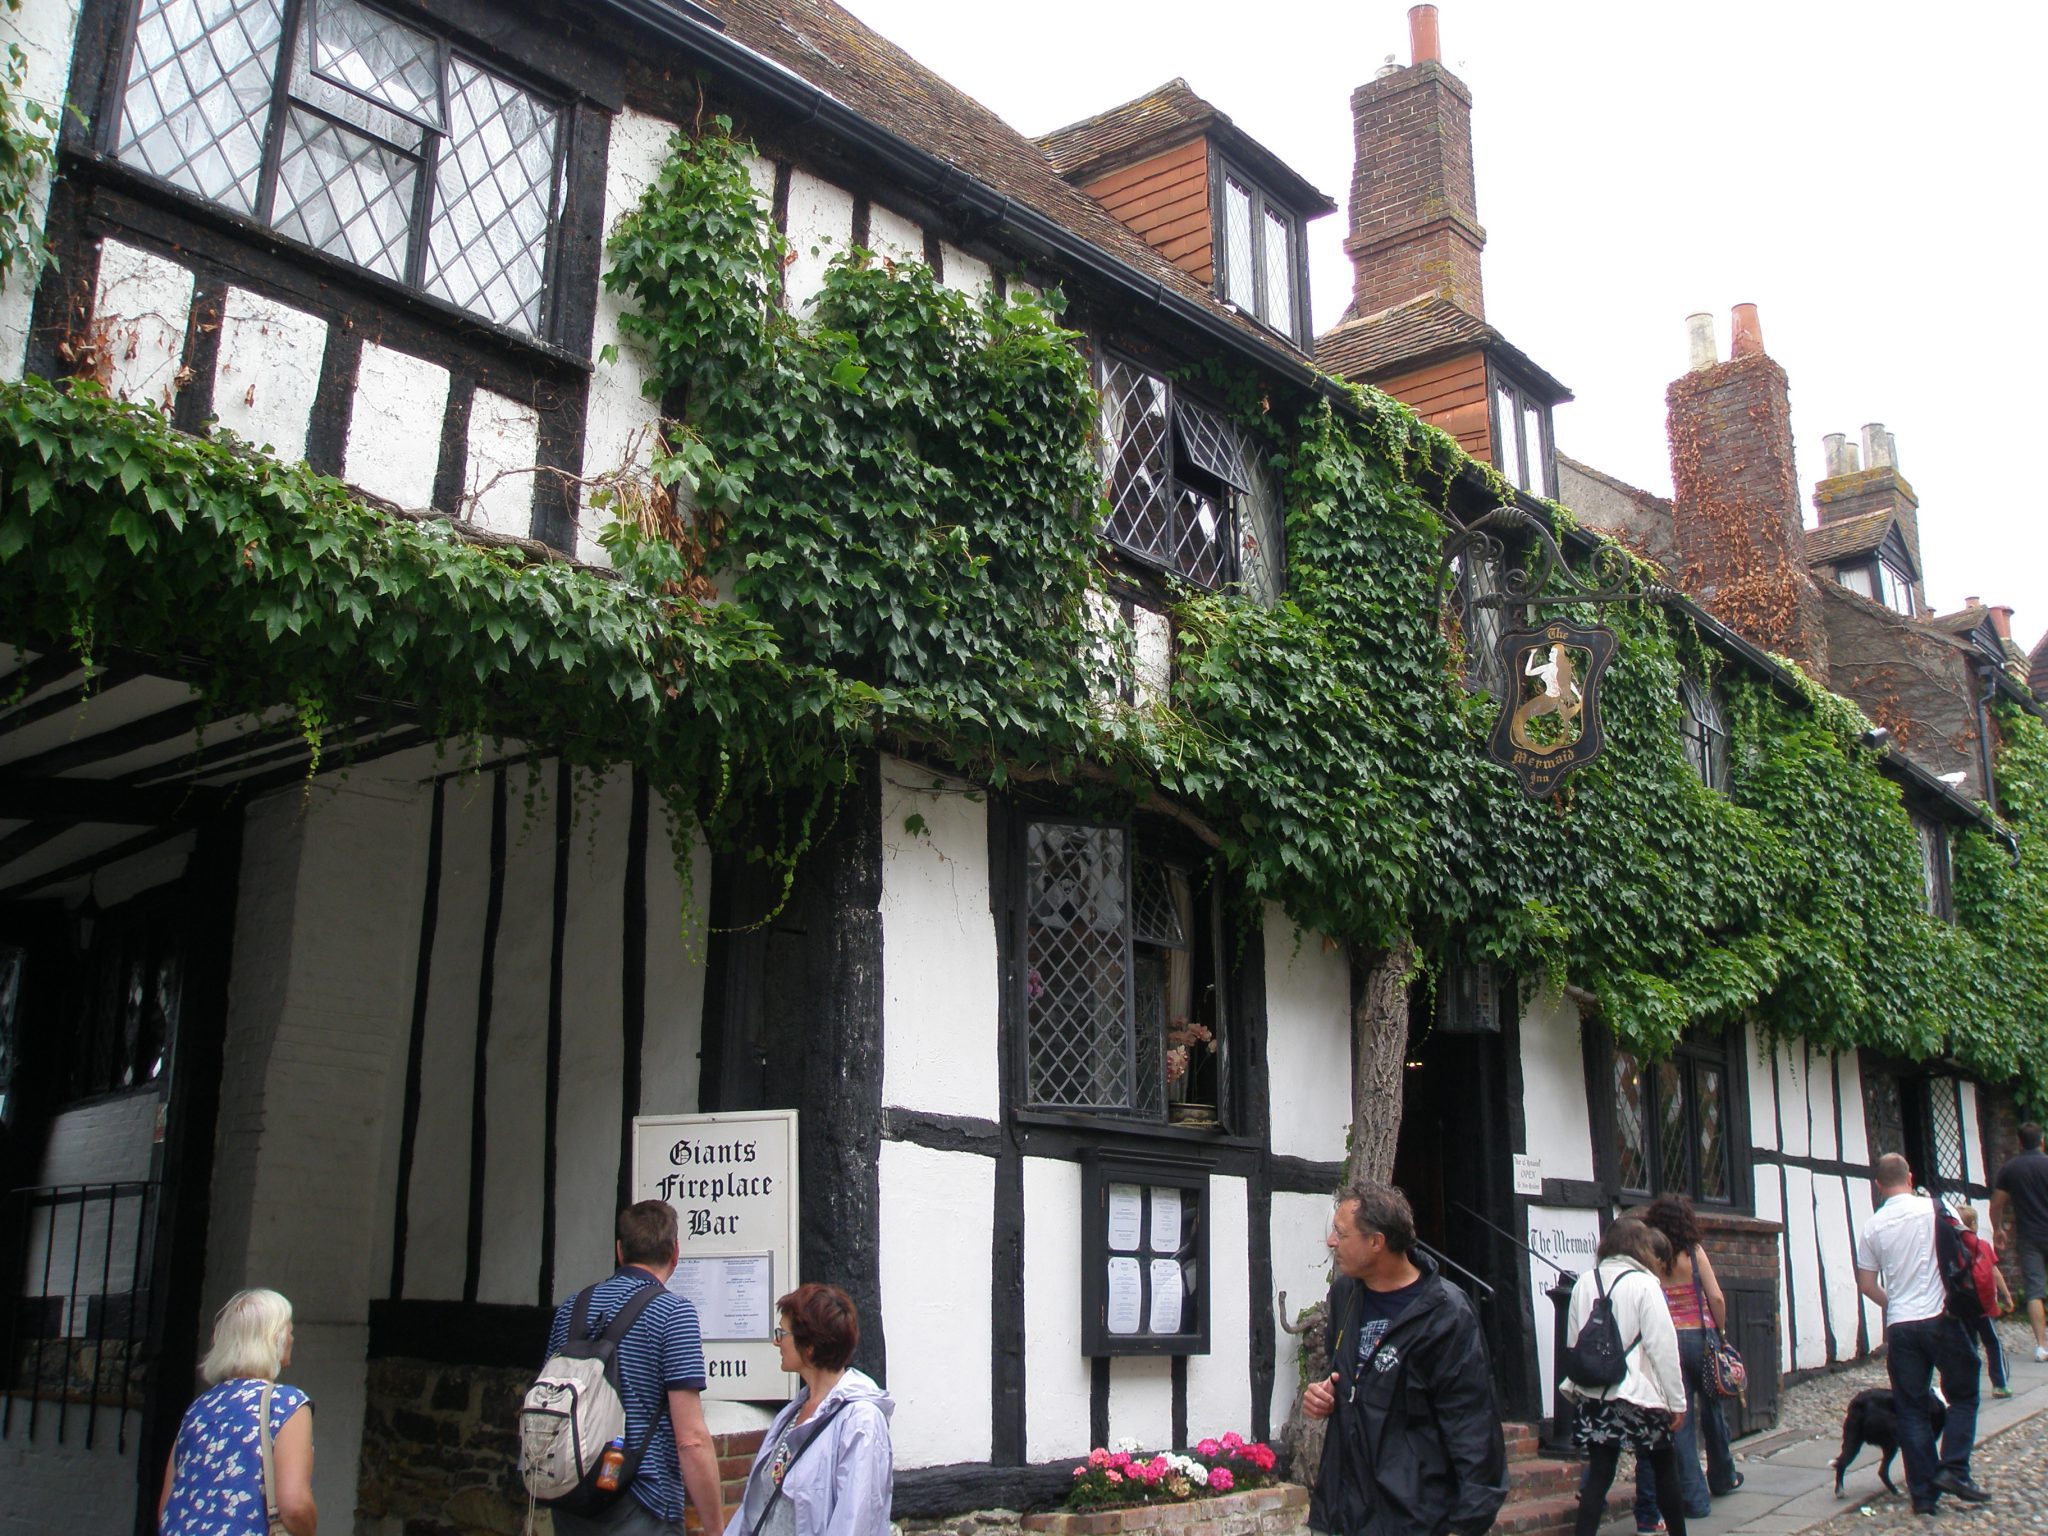 The Mermaid Inn. Some of the timbers of the Inn were taken from ships that had been disassembled. For those so-inclined (which I'm NOT), the Mermaid Inn is reputed to be one of the most-haunted buildings in England. Of the Inn's 31 bedrooms, 6 are said to be plagued by ghostly visitors.